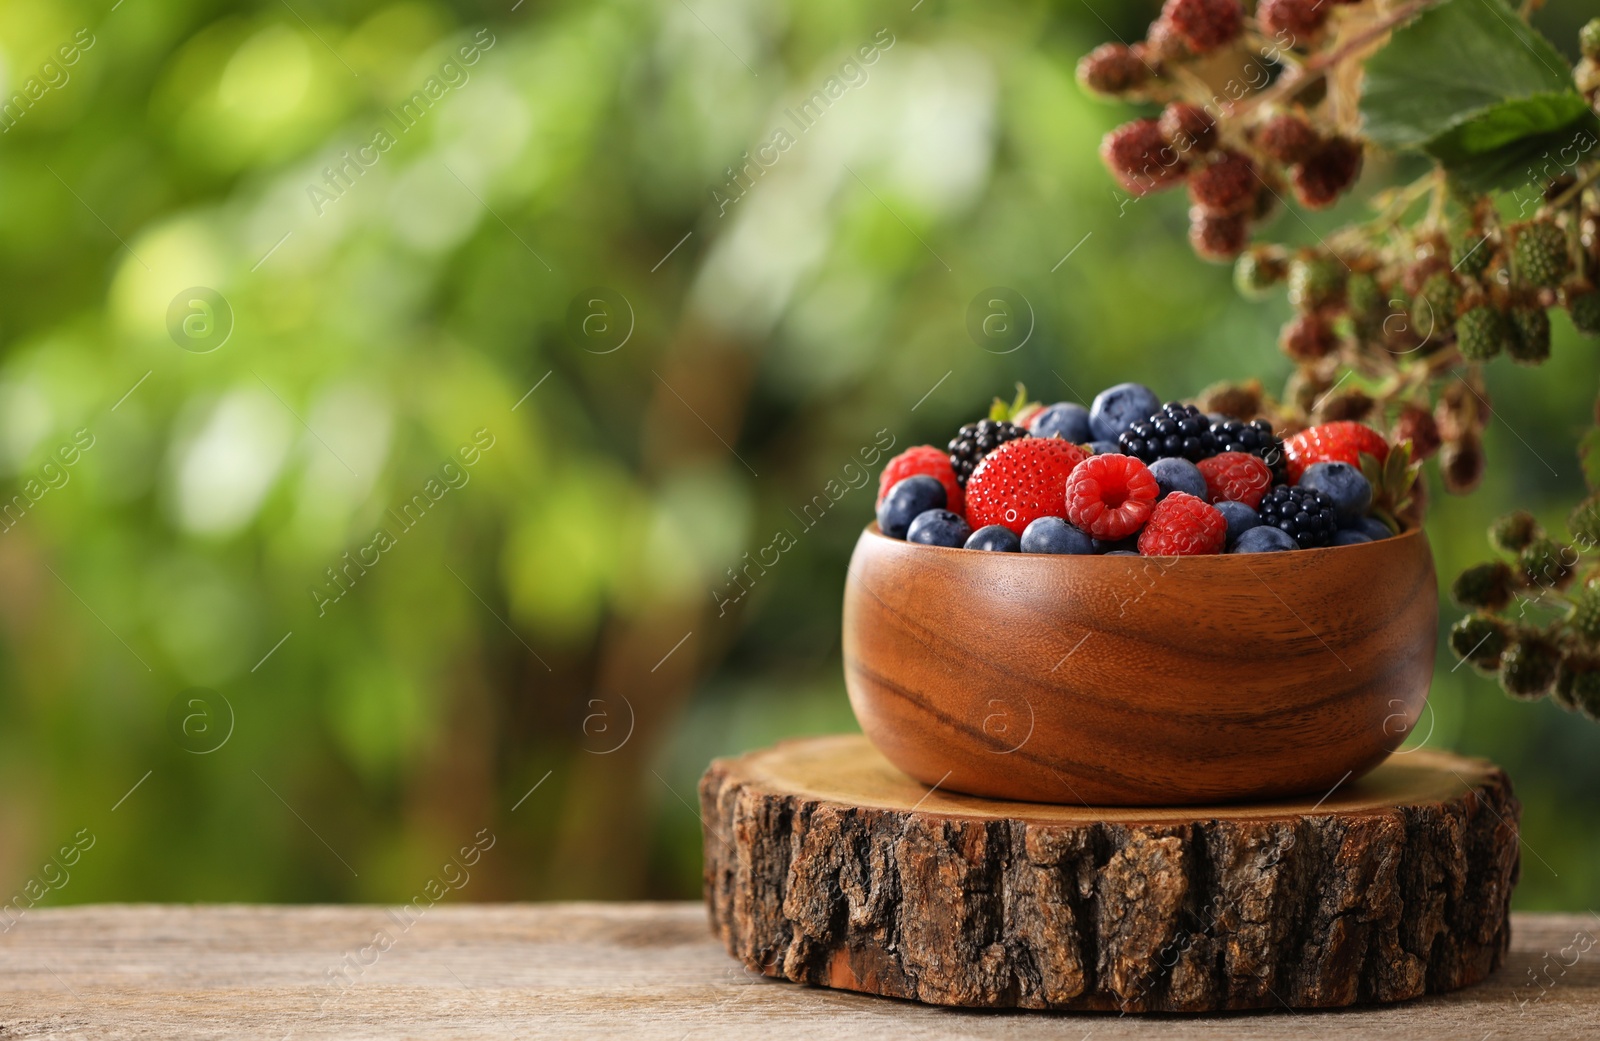 Photo of Different fresh berries in bowl on wooden table outdoors. Space for text